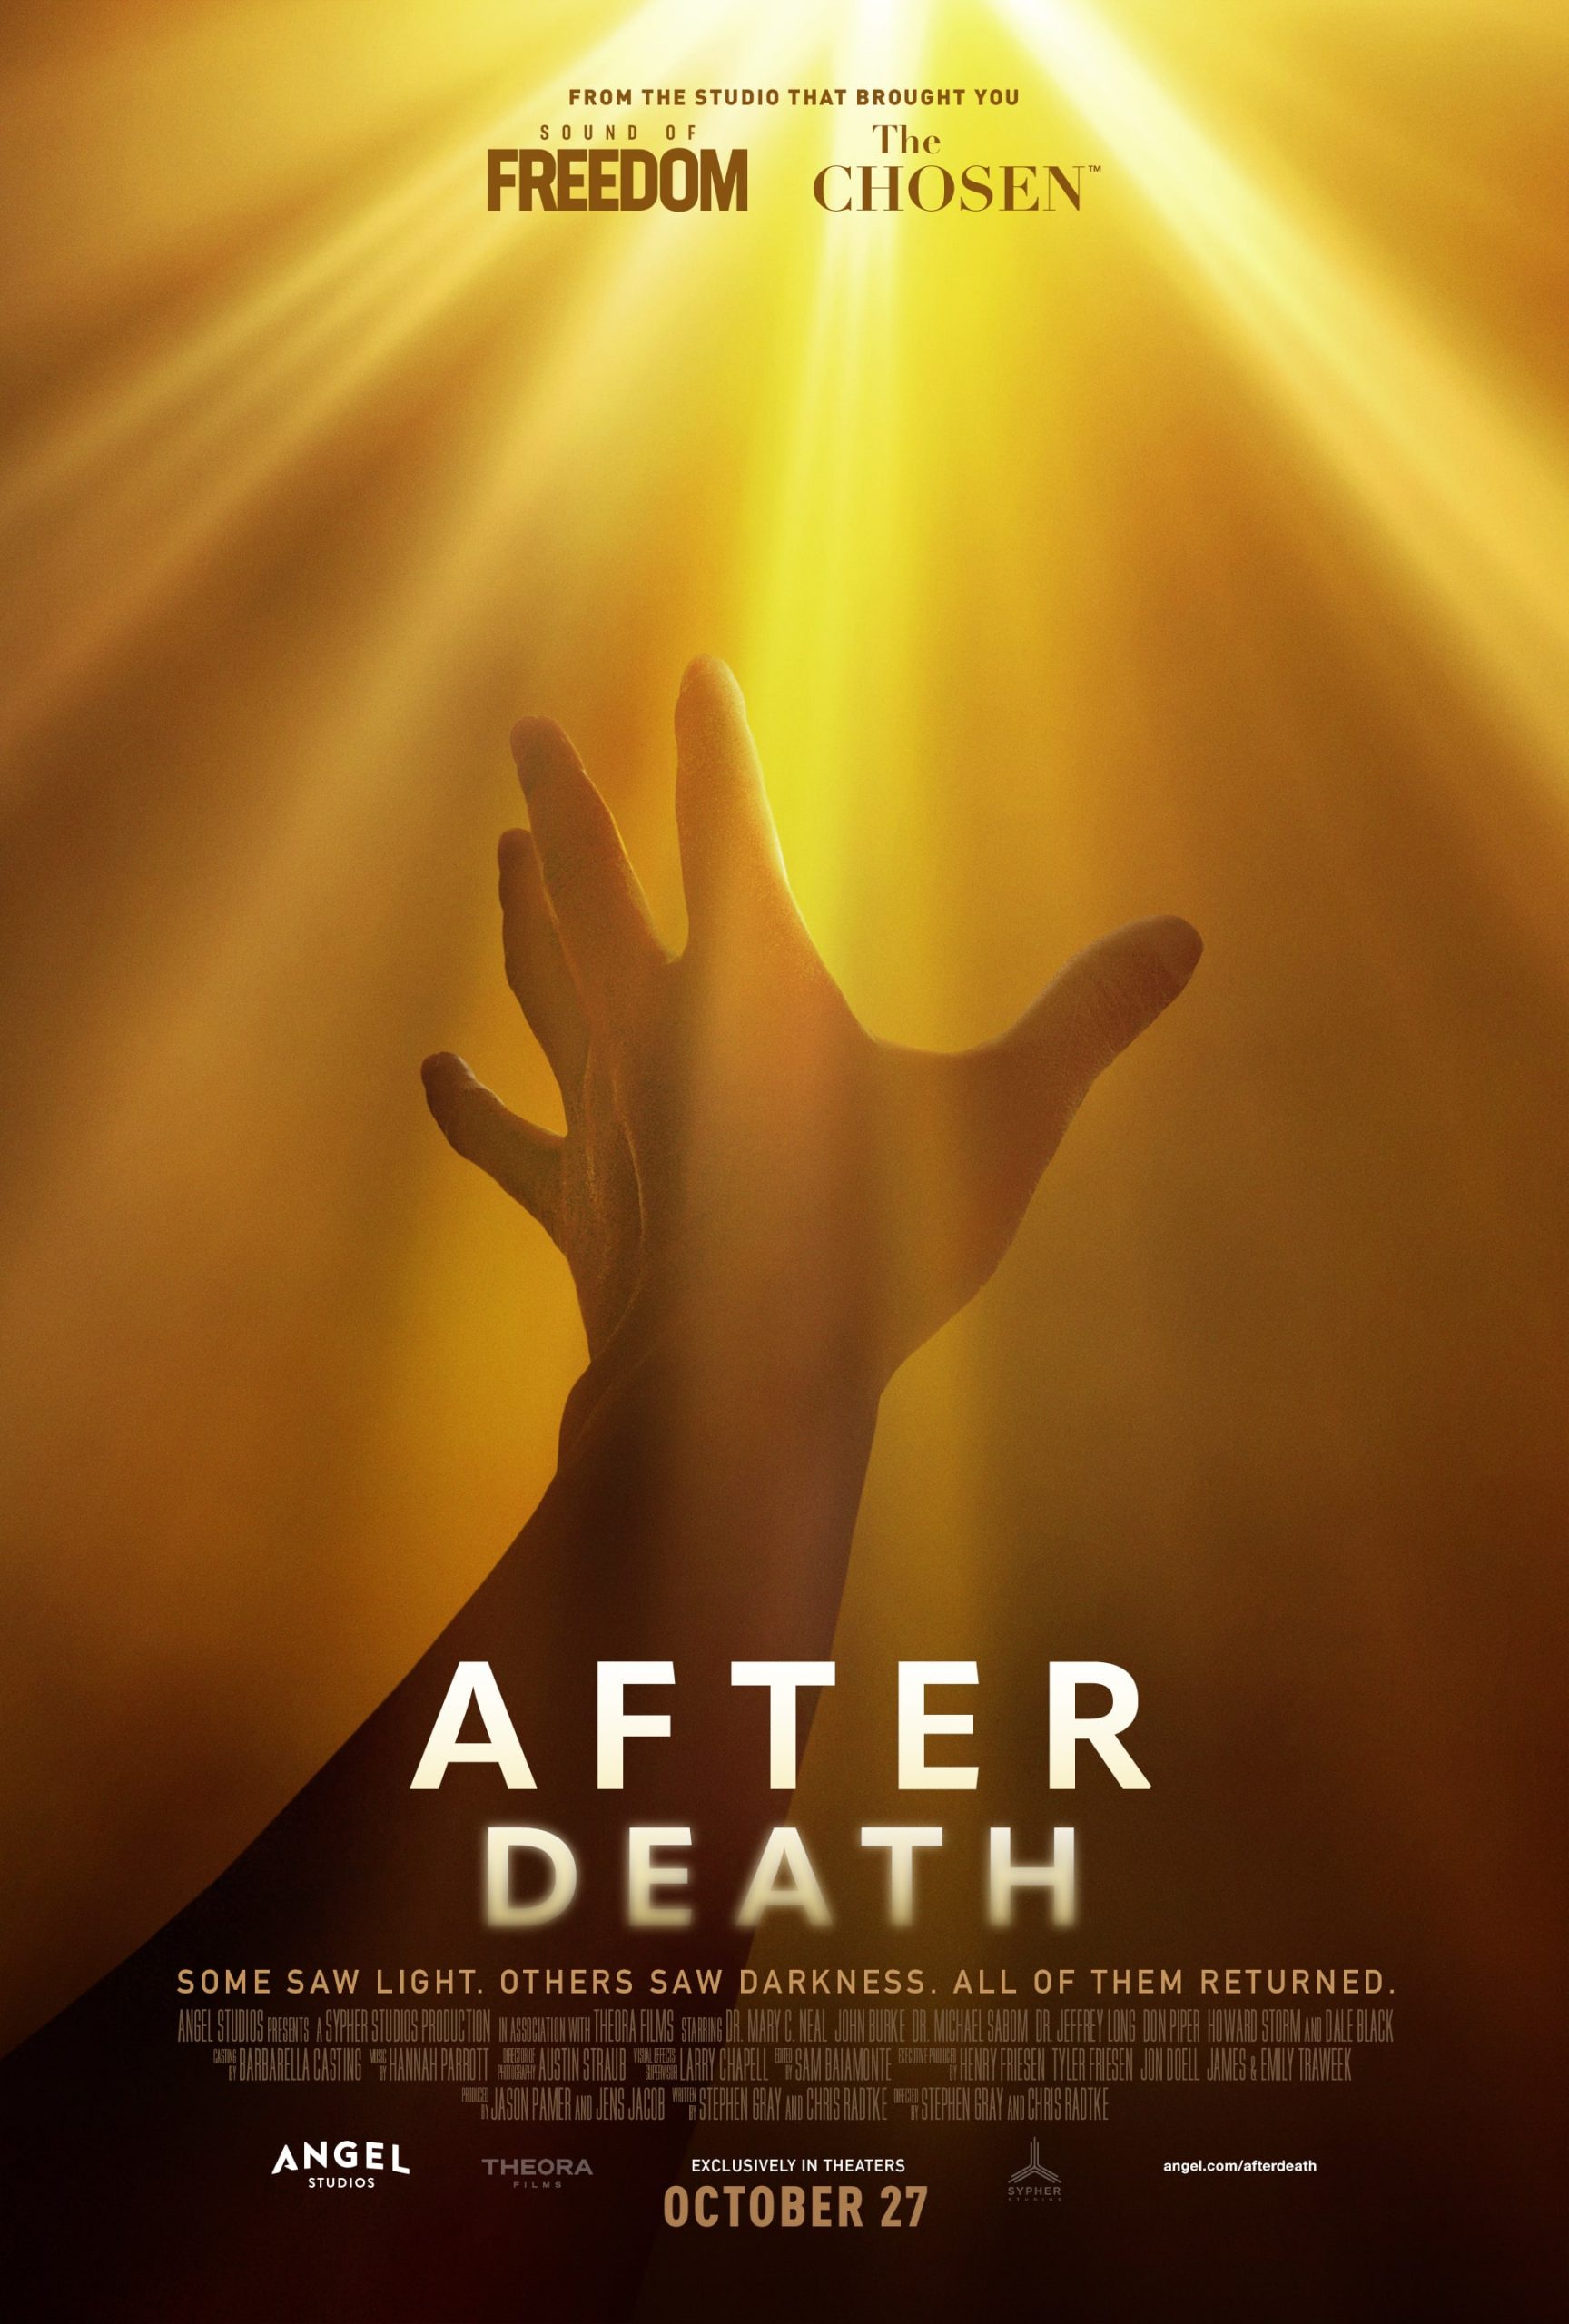 Movie Poster: After Death